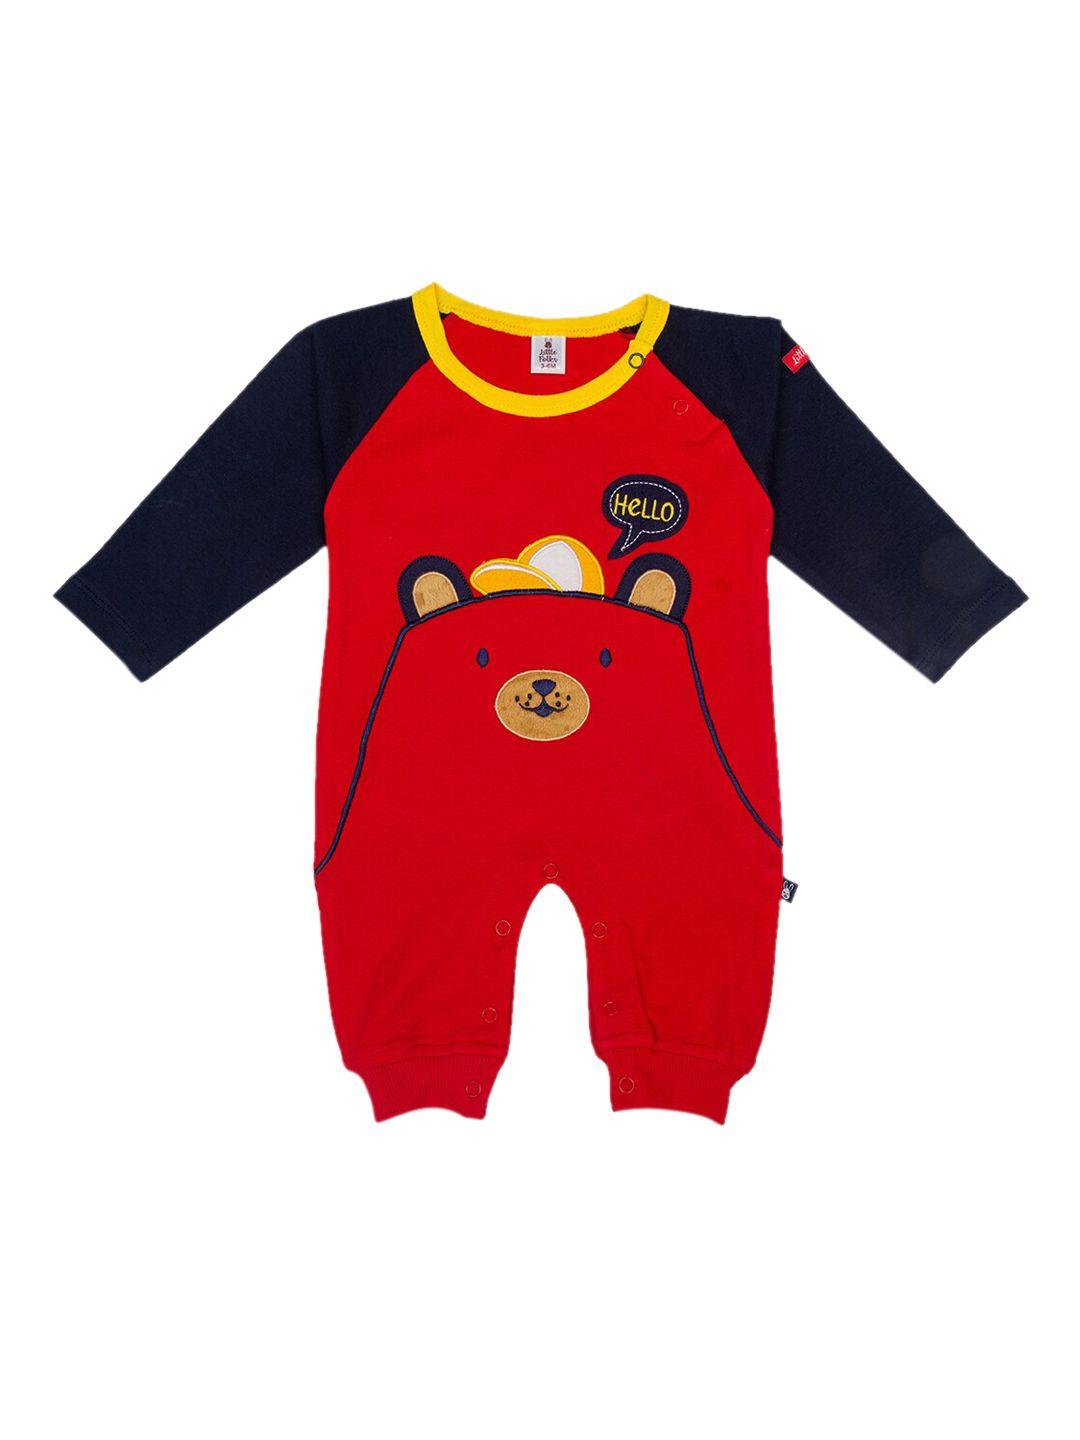 little folks infant kids red & navy blue printed cotton rompers